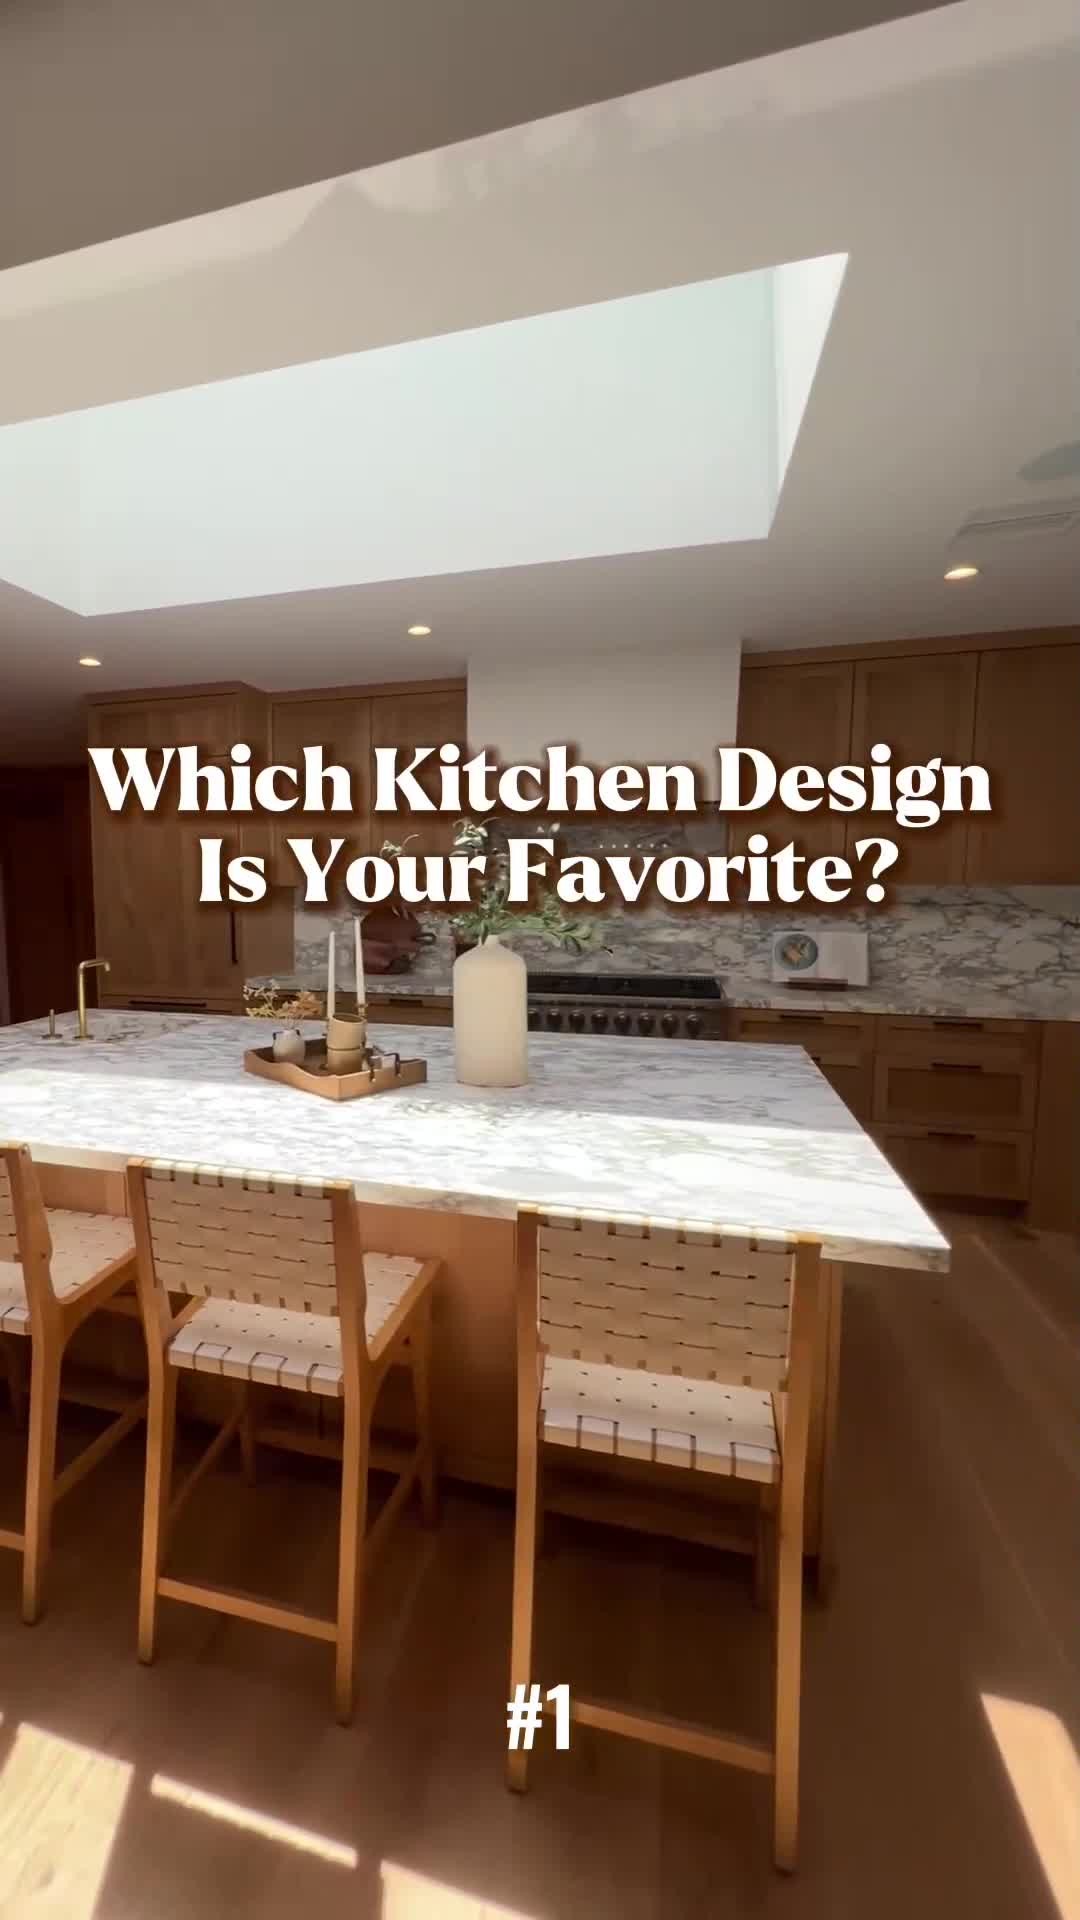 Which kitchen design is your favorite?🏡 1, 2, 3, or...